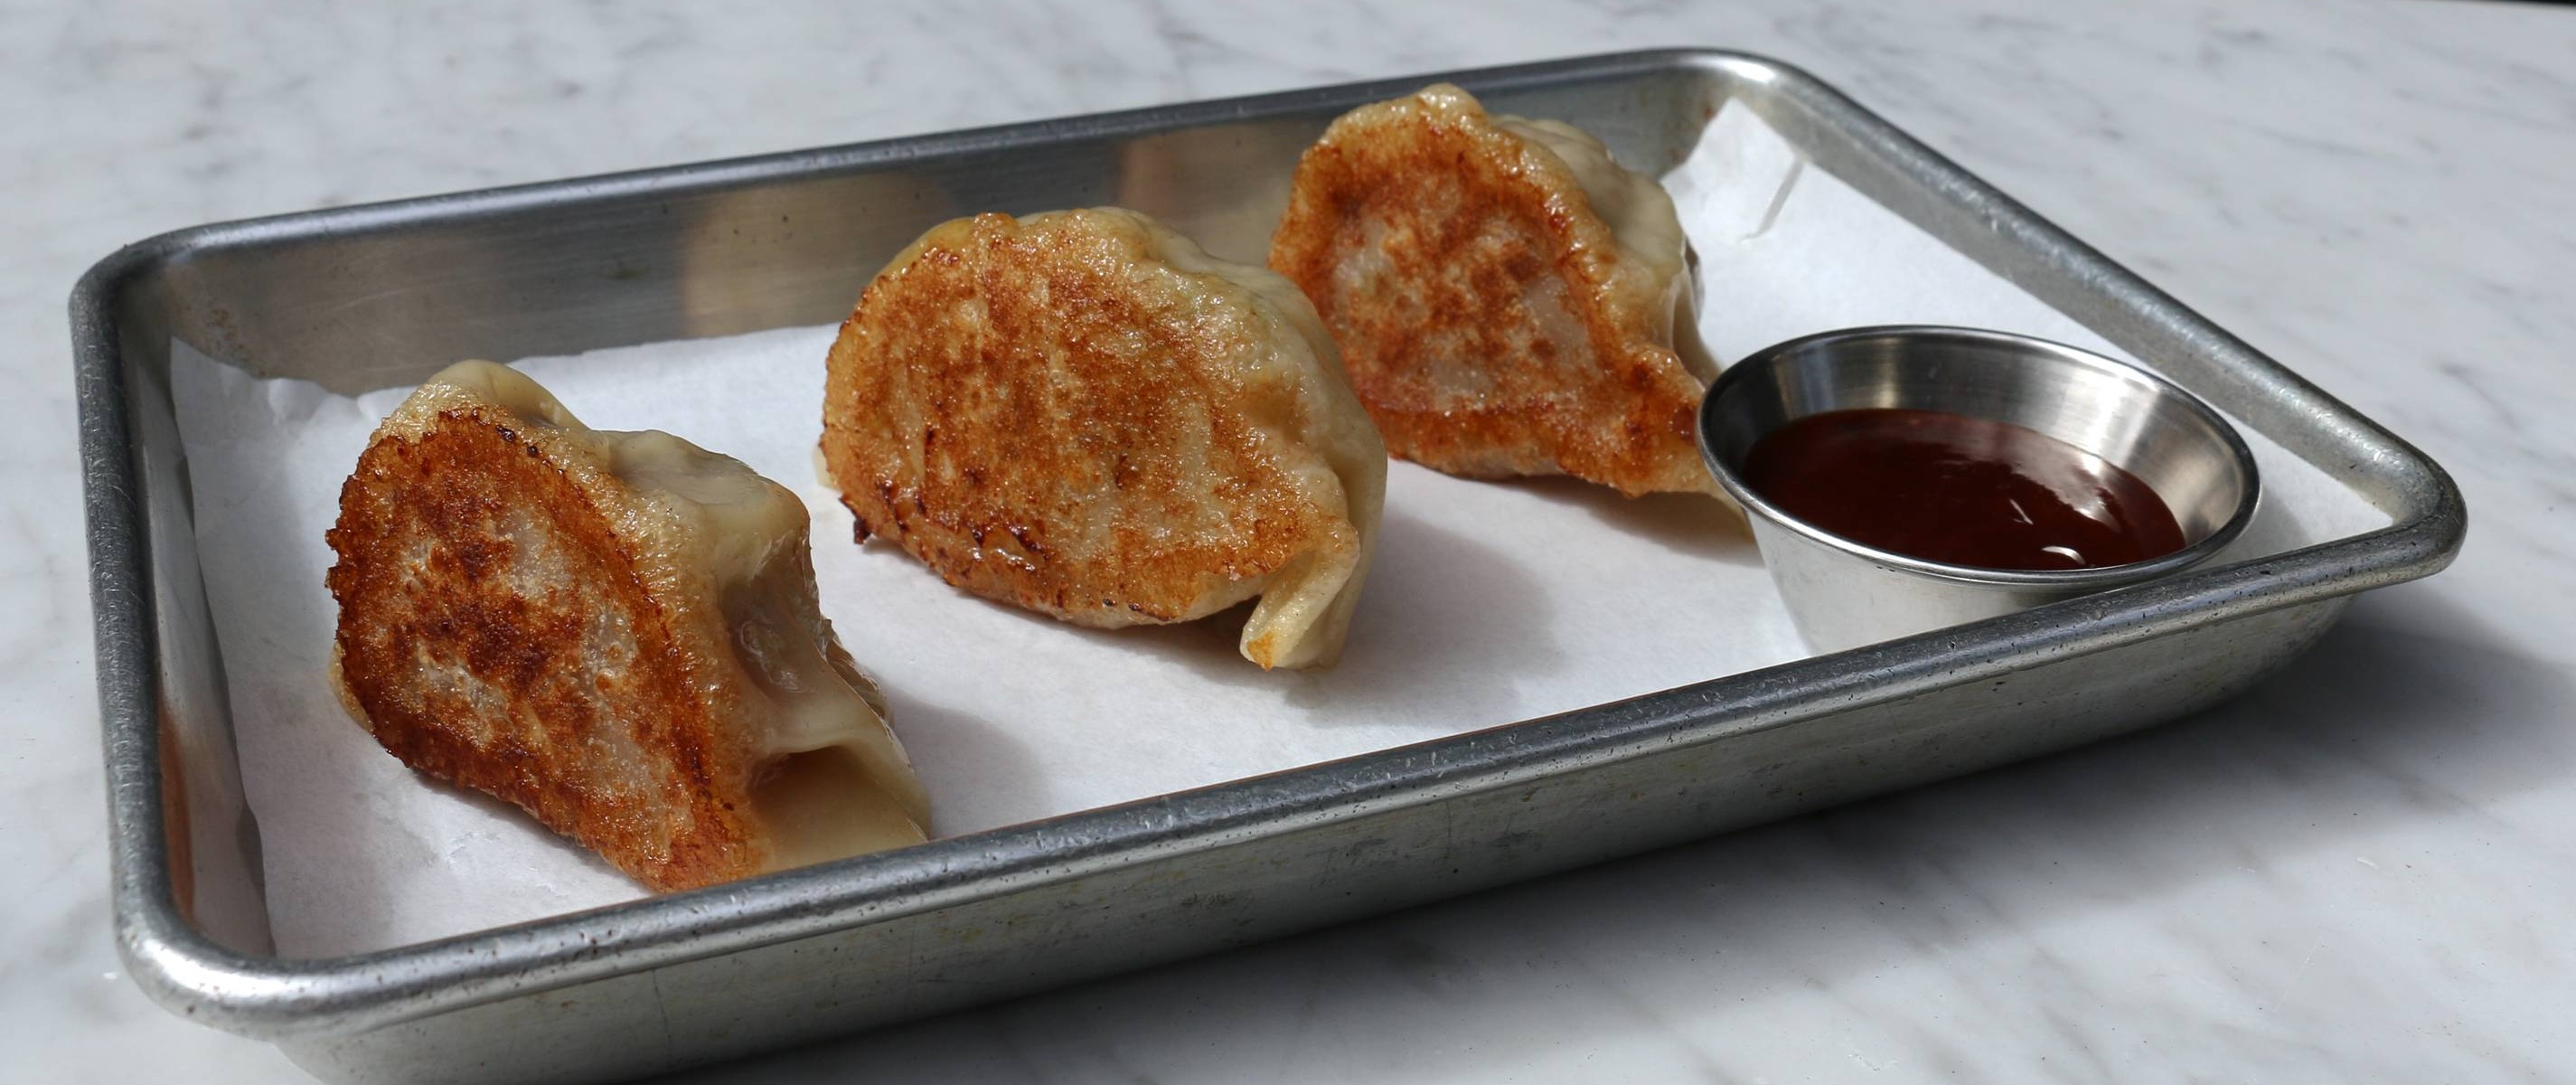 https://mlchicagosocial.com/get/files/image/galleries/Weekly-Recipe-Pork-Pot-Stickers-by-Yeoh-Chee_Thumb.jpg